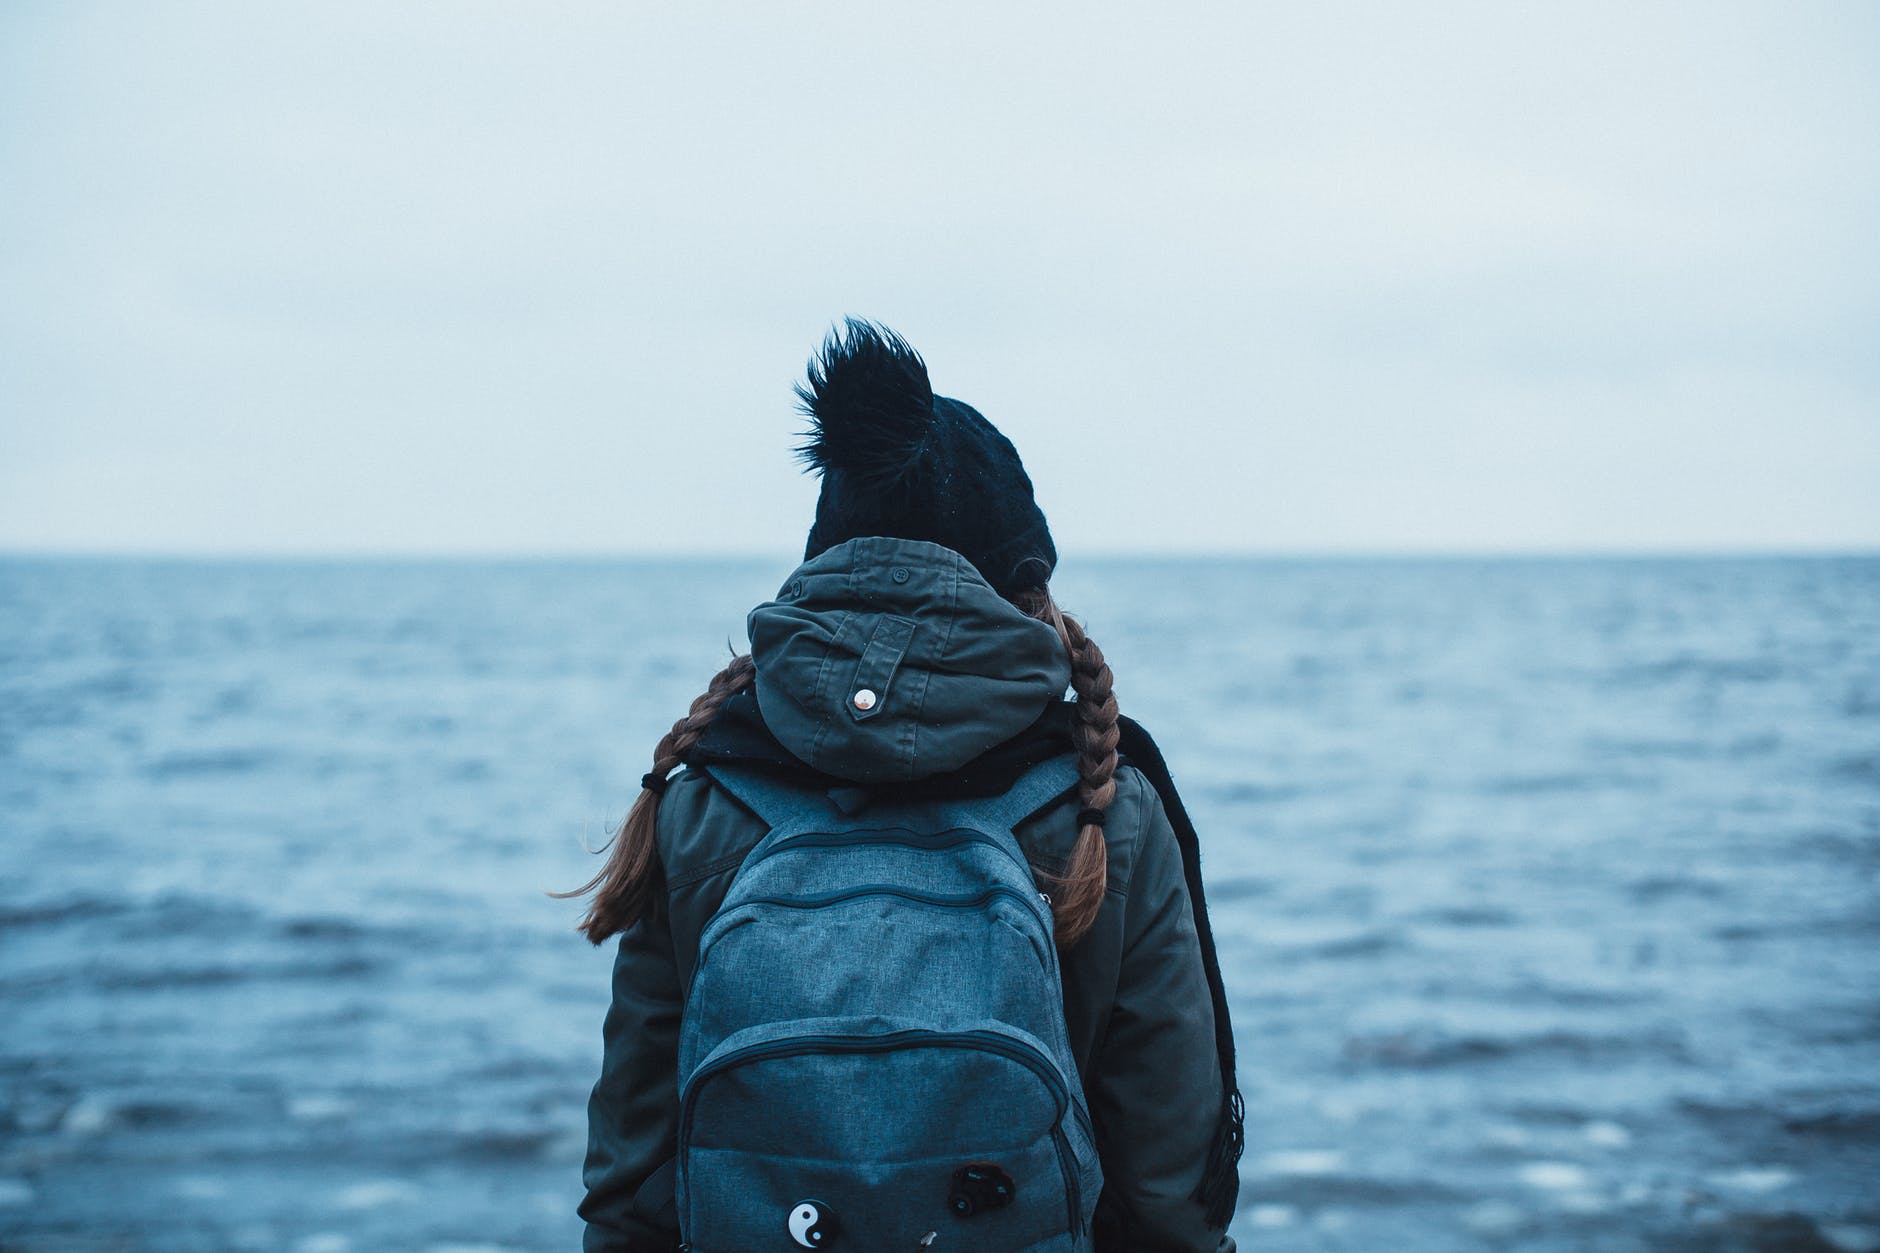 back view of a person carrying a backpack looking into the ocean